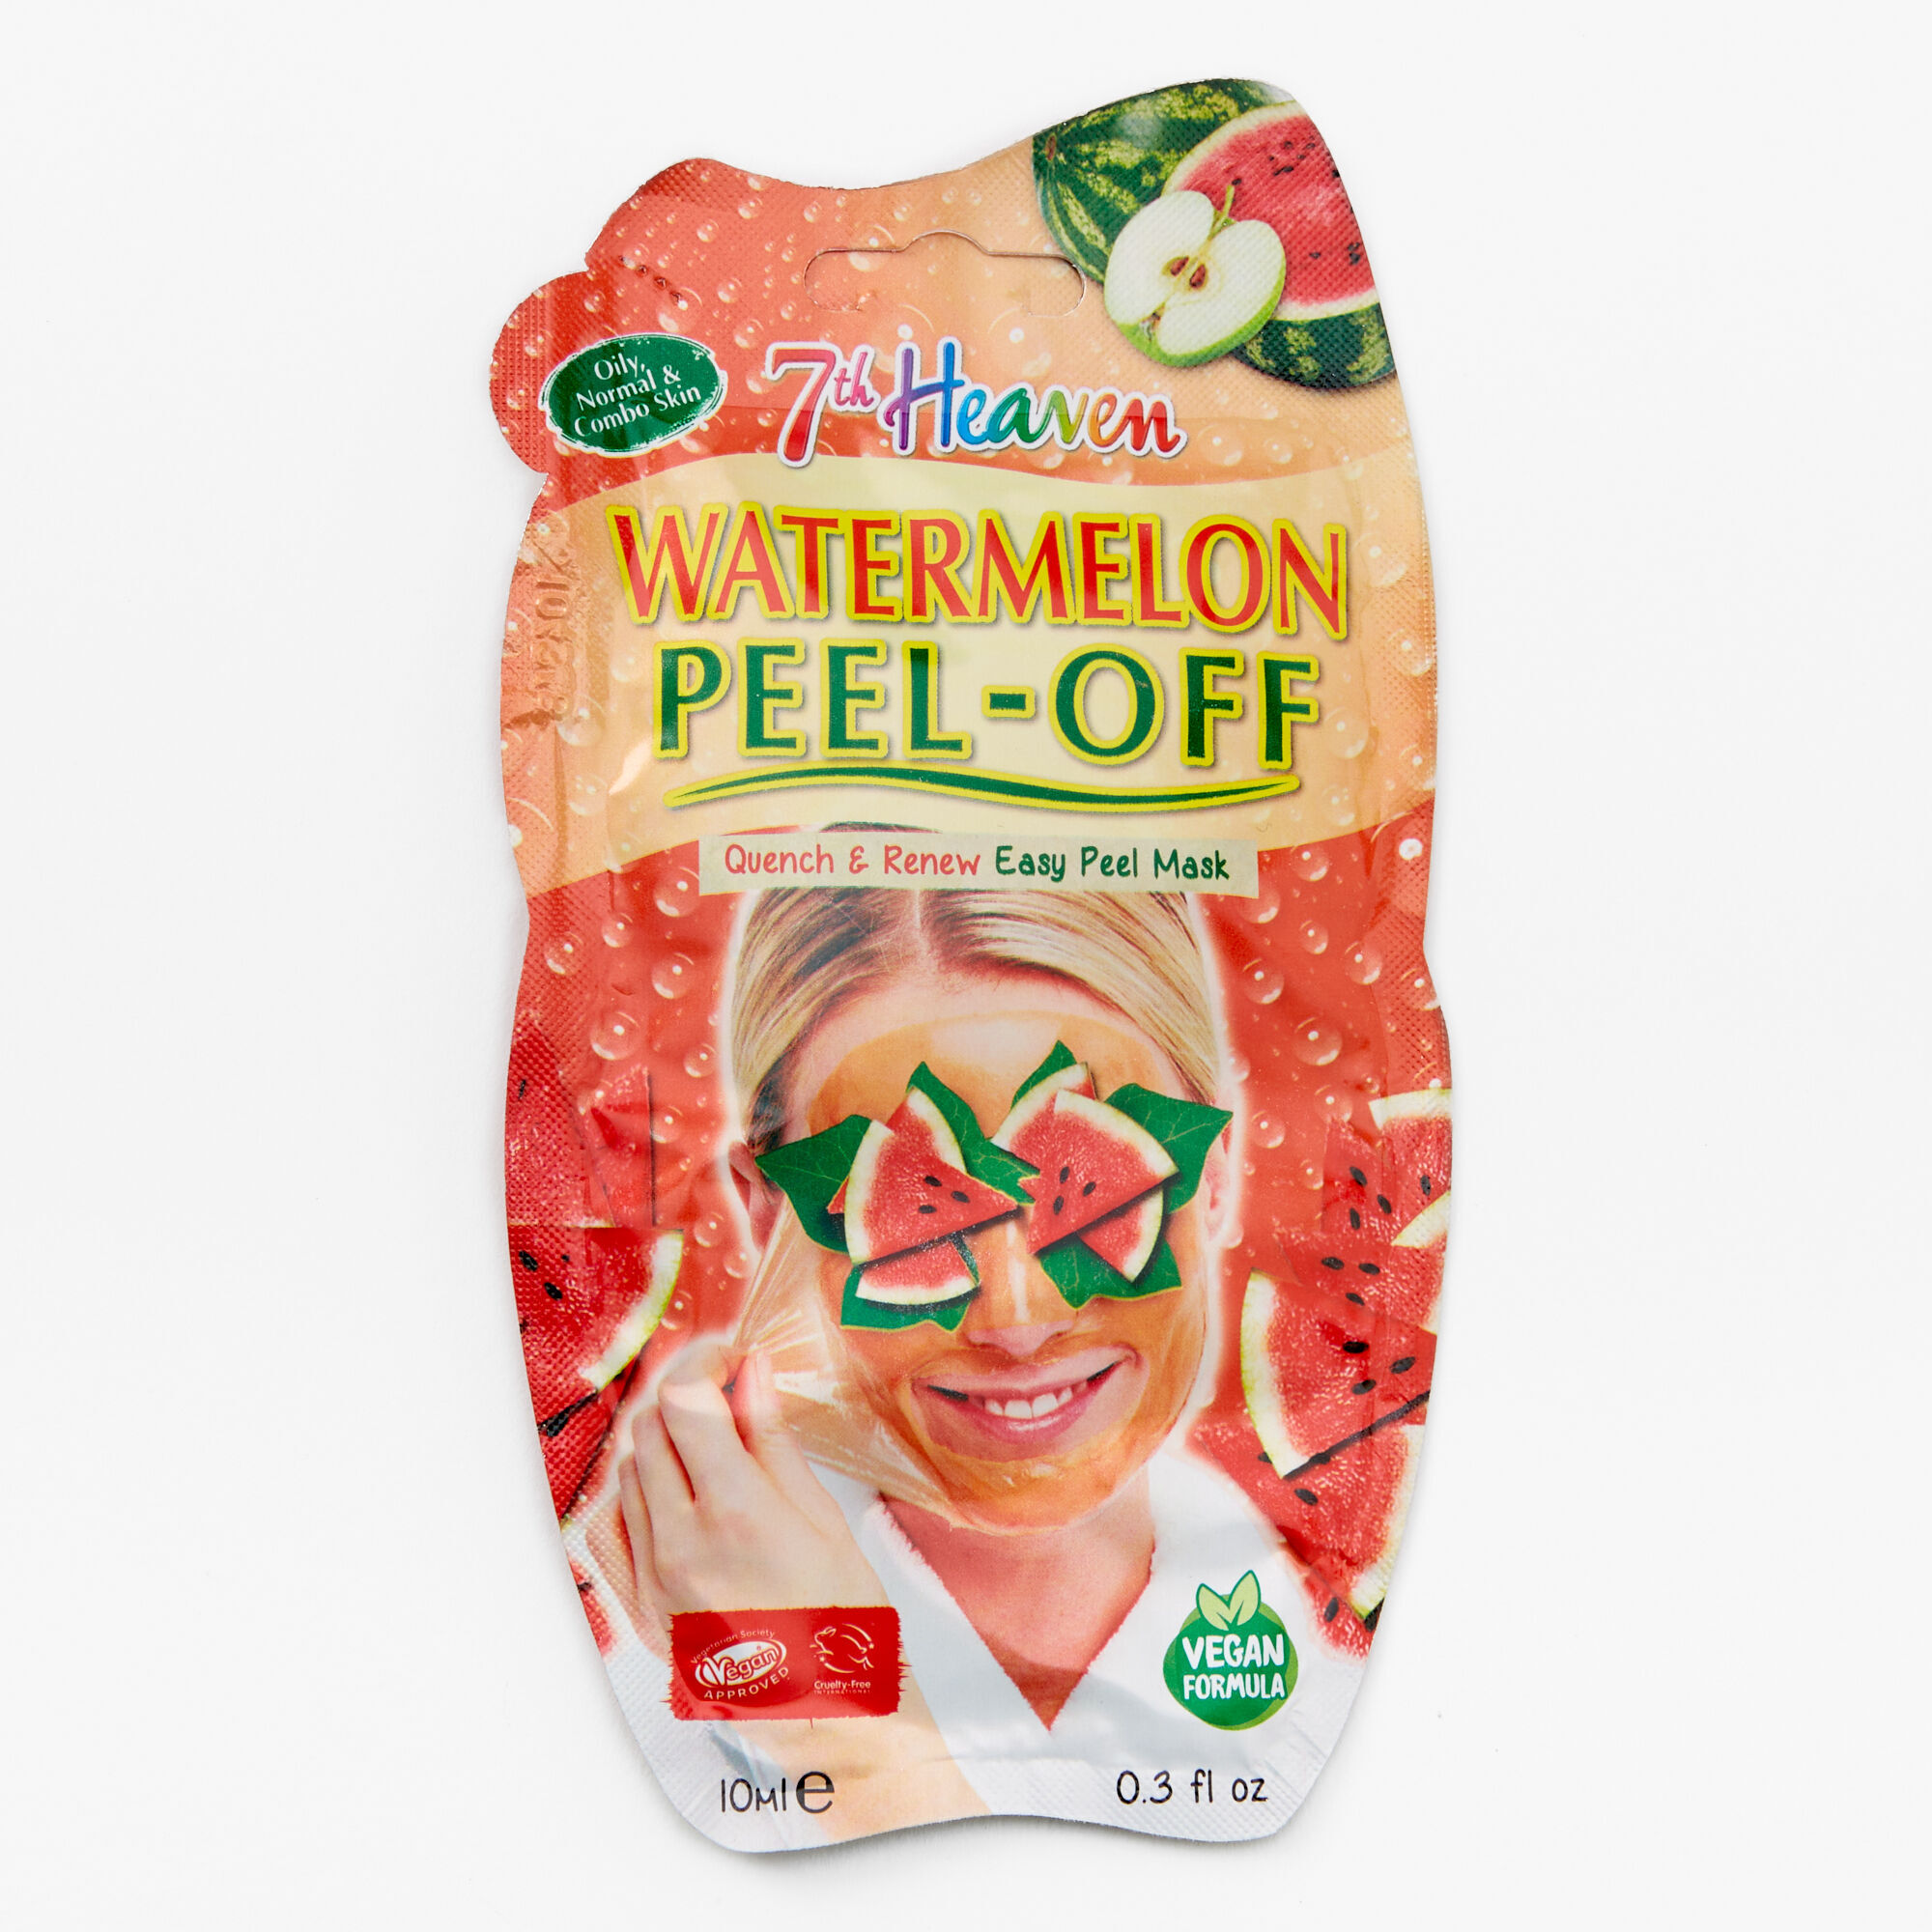 View Claires 7Th Heaven Watermelon Peel Off Face Mask information